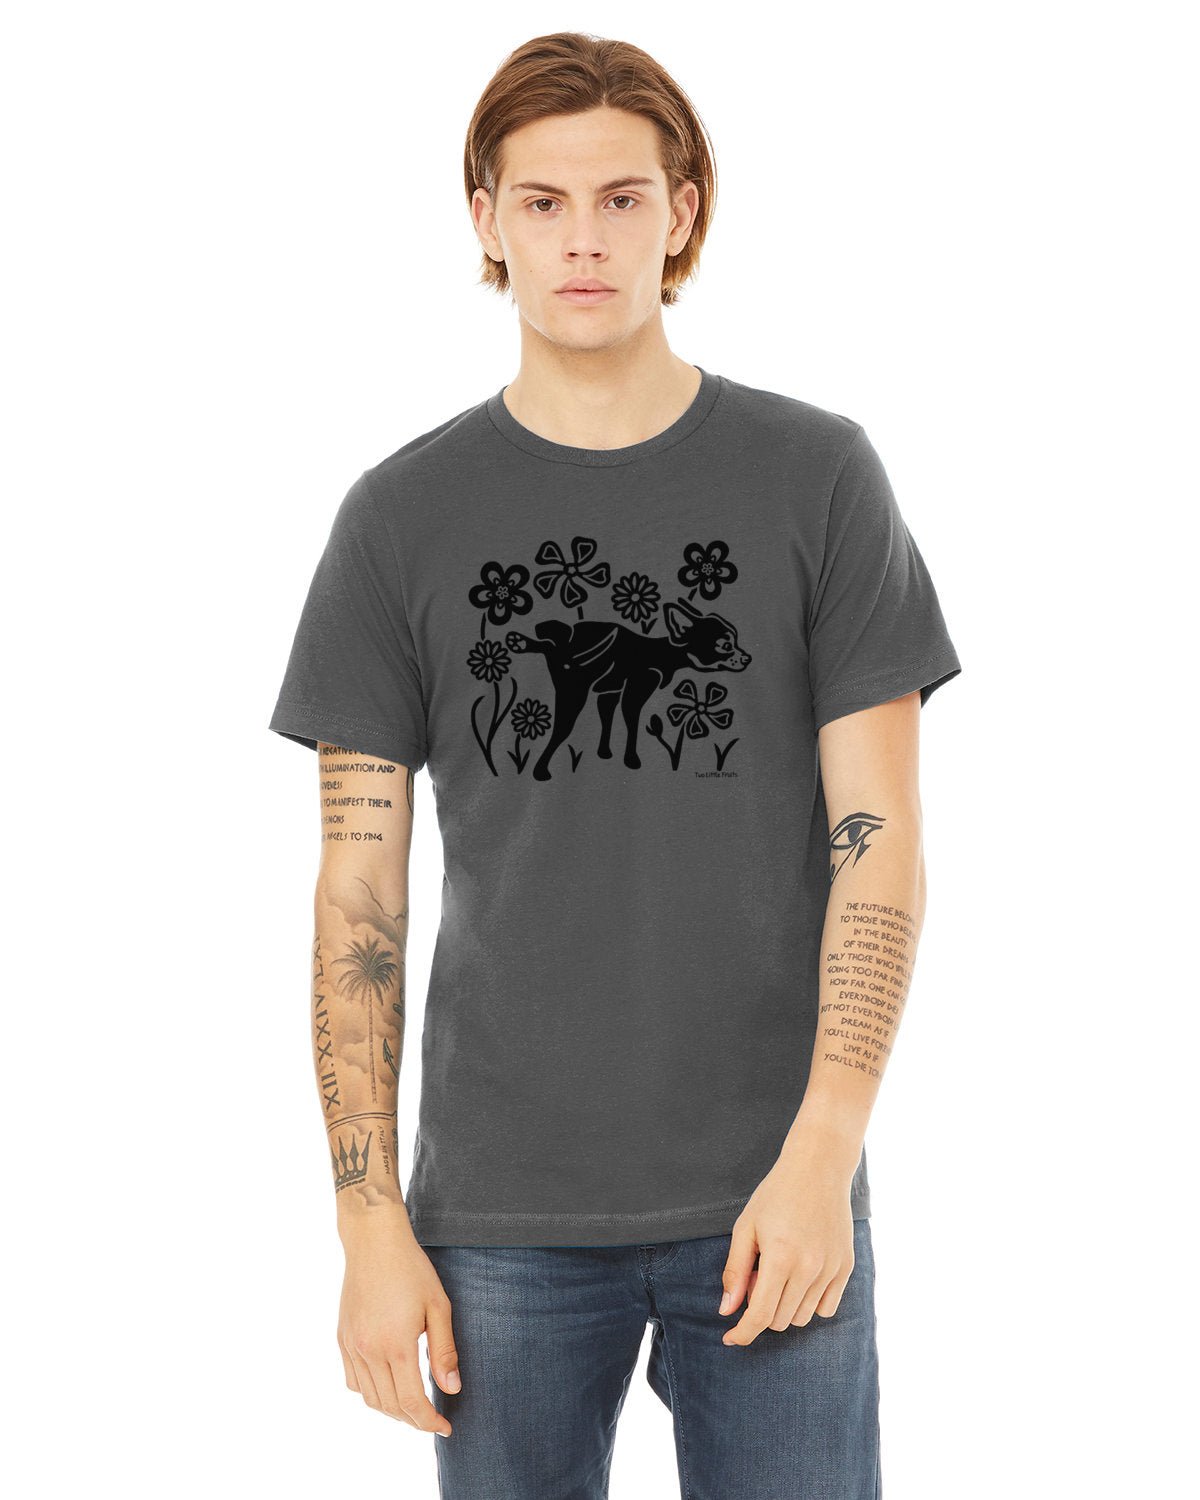 Dog Graphic Tee Shirt - Two Little Fruits